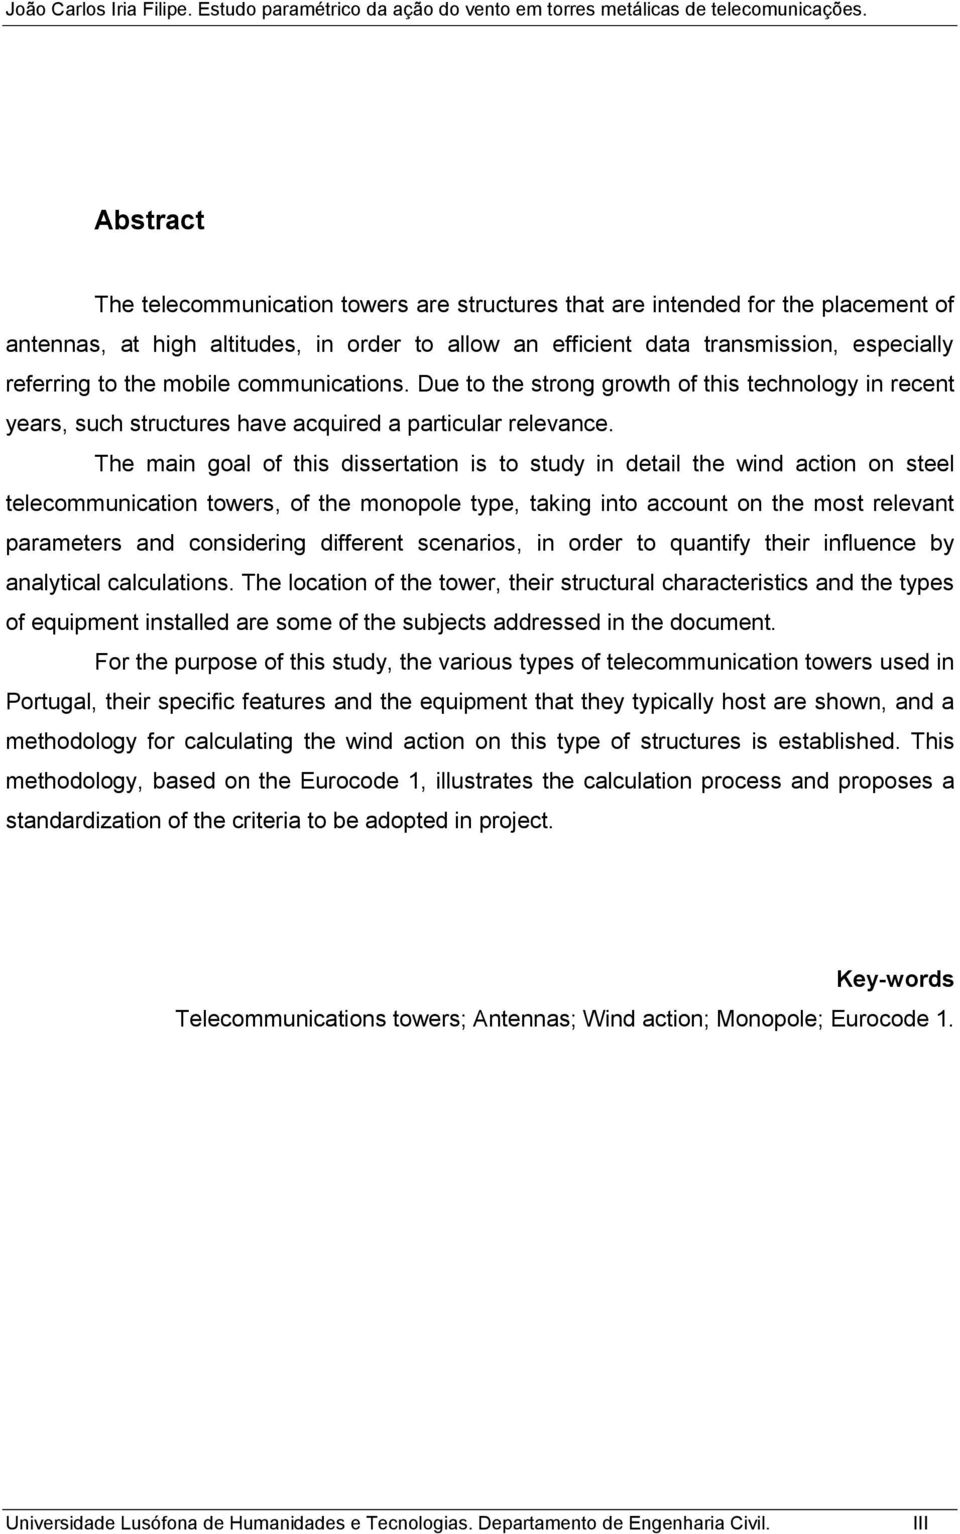 The main goal of this dissertation is to study in detail the wind action on steel telecommunication towers, of the monopole type, taking into account on the most relevant parameters and considering